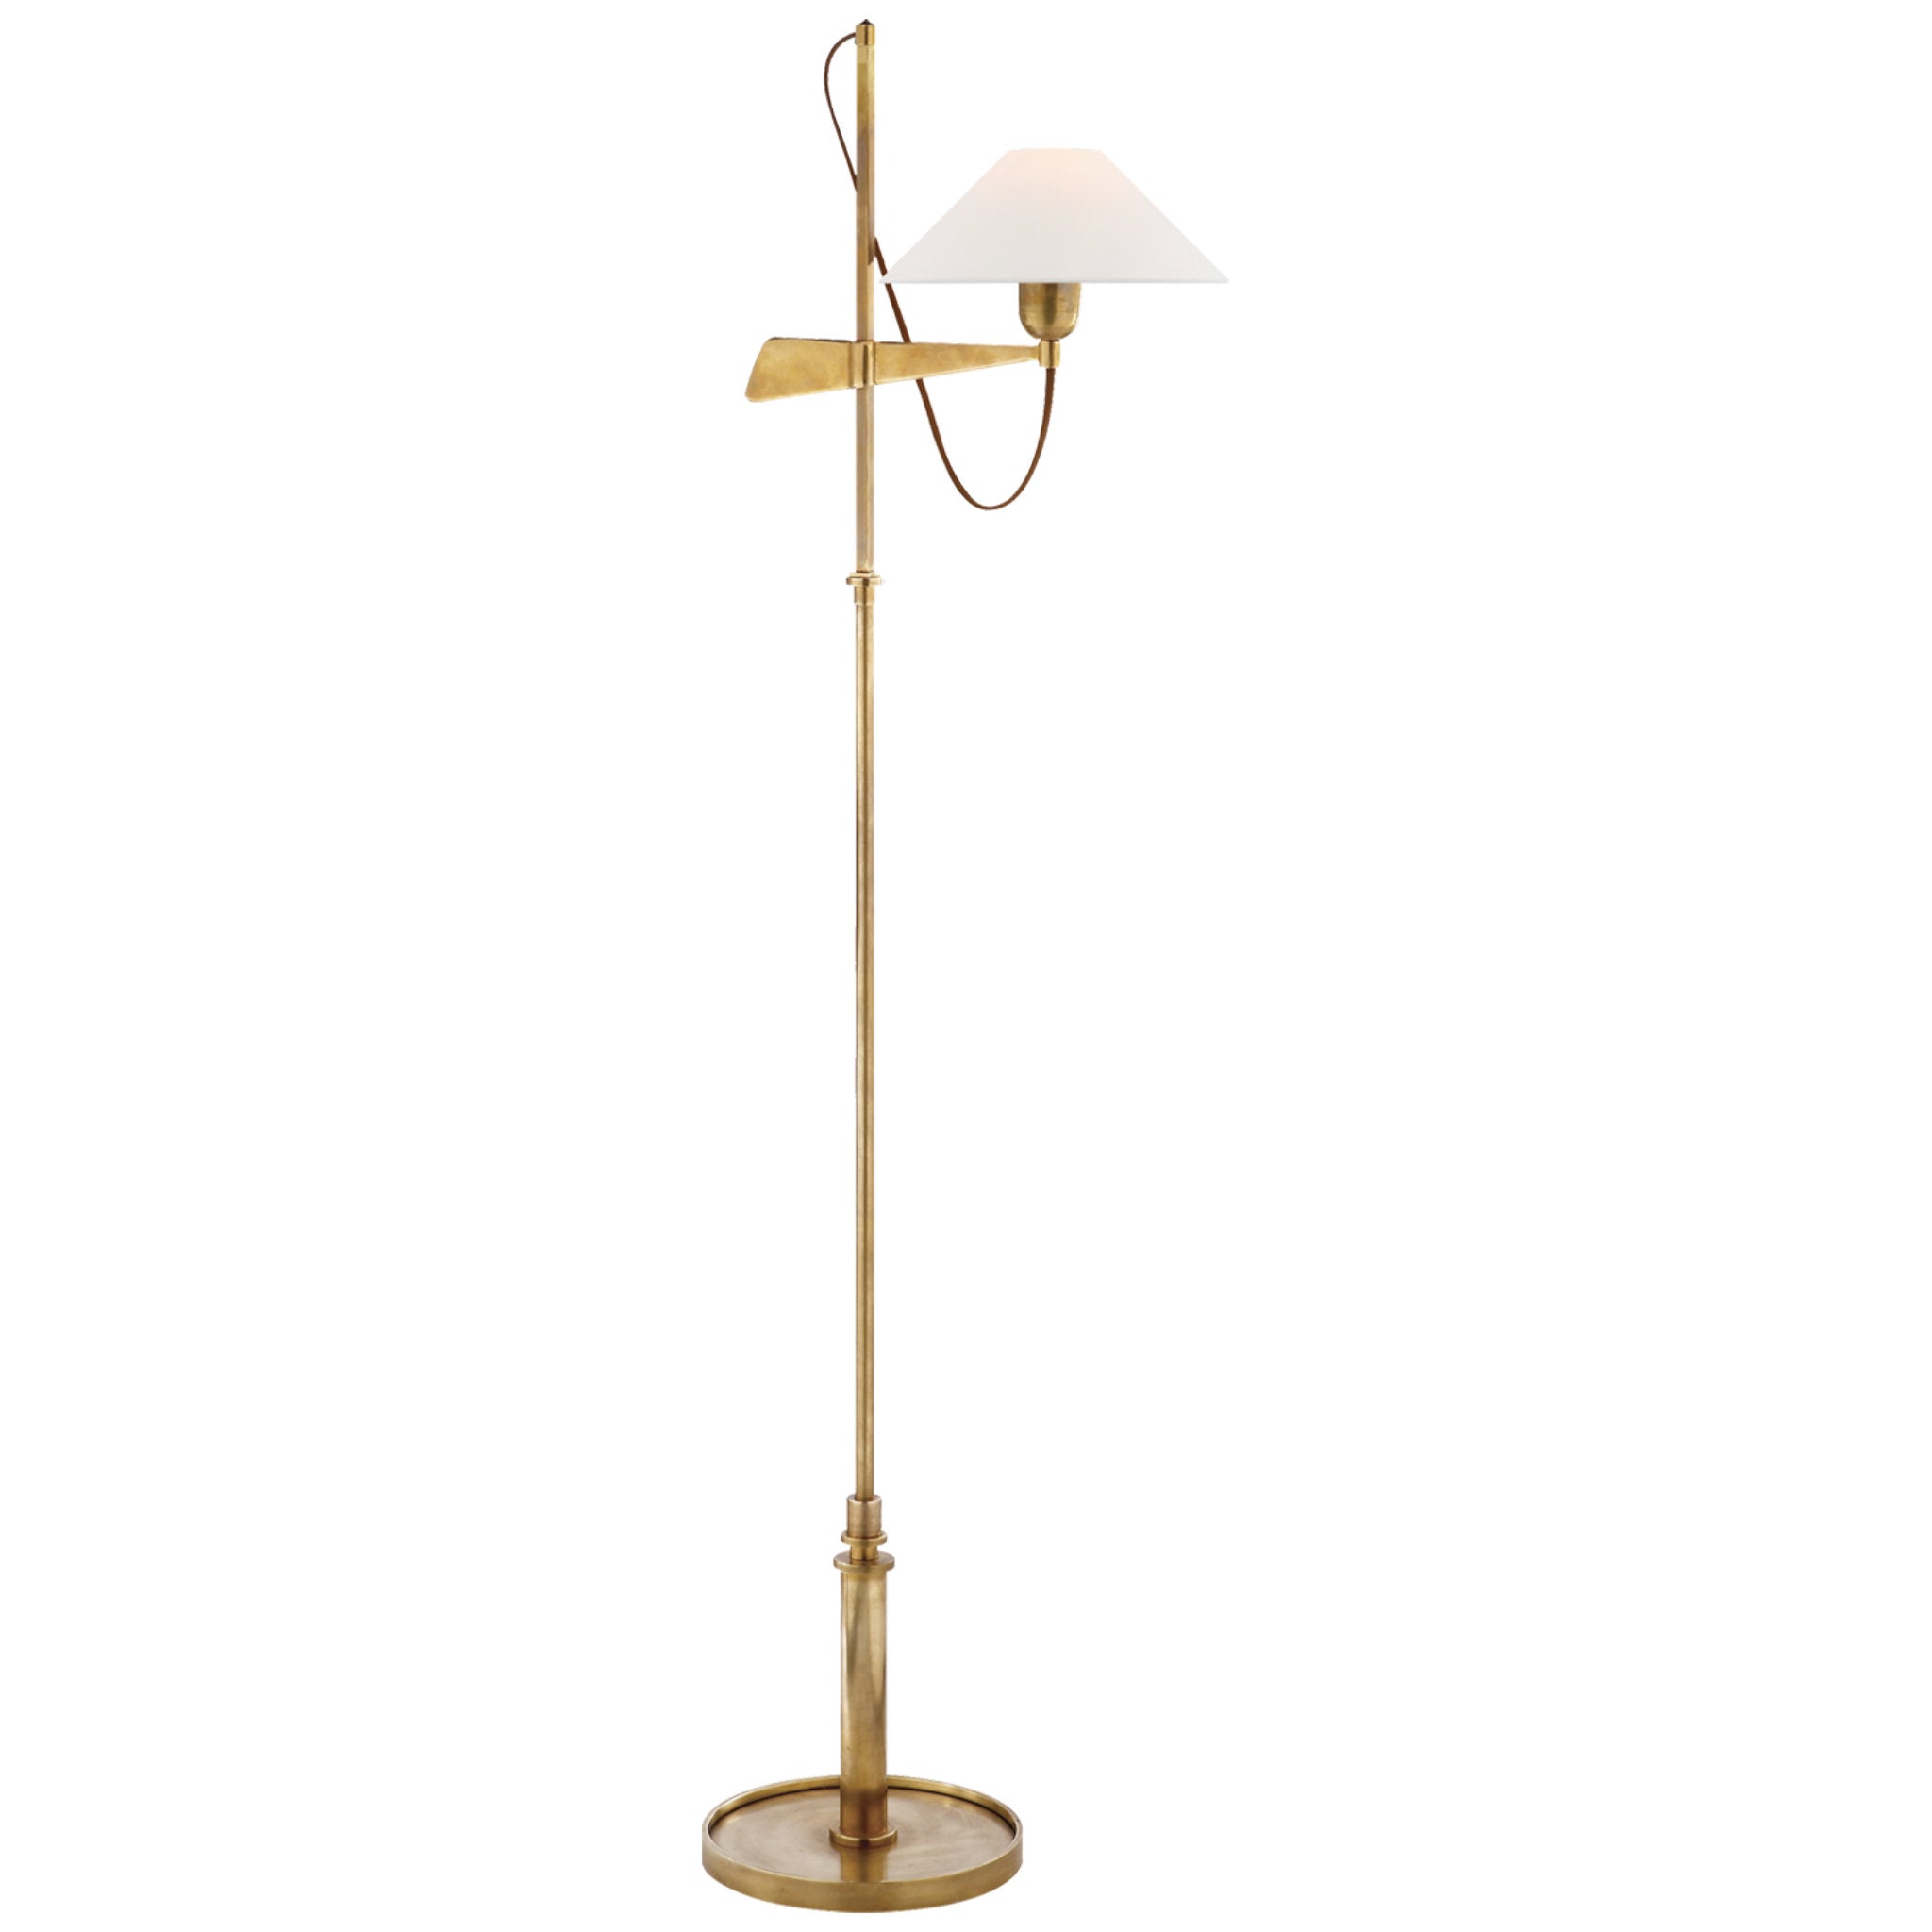 J. Randall Powers Hargett Bridge Arm Floor Lamp in Hand-Rubbed Antique Brass with Linen Shade